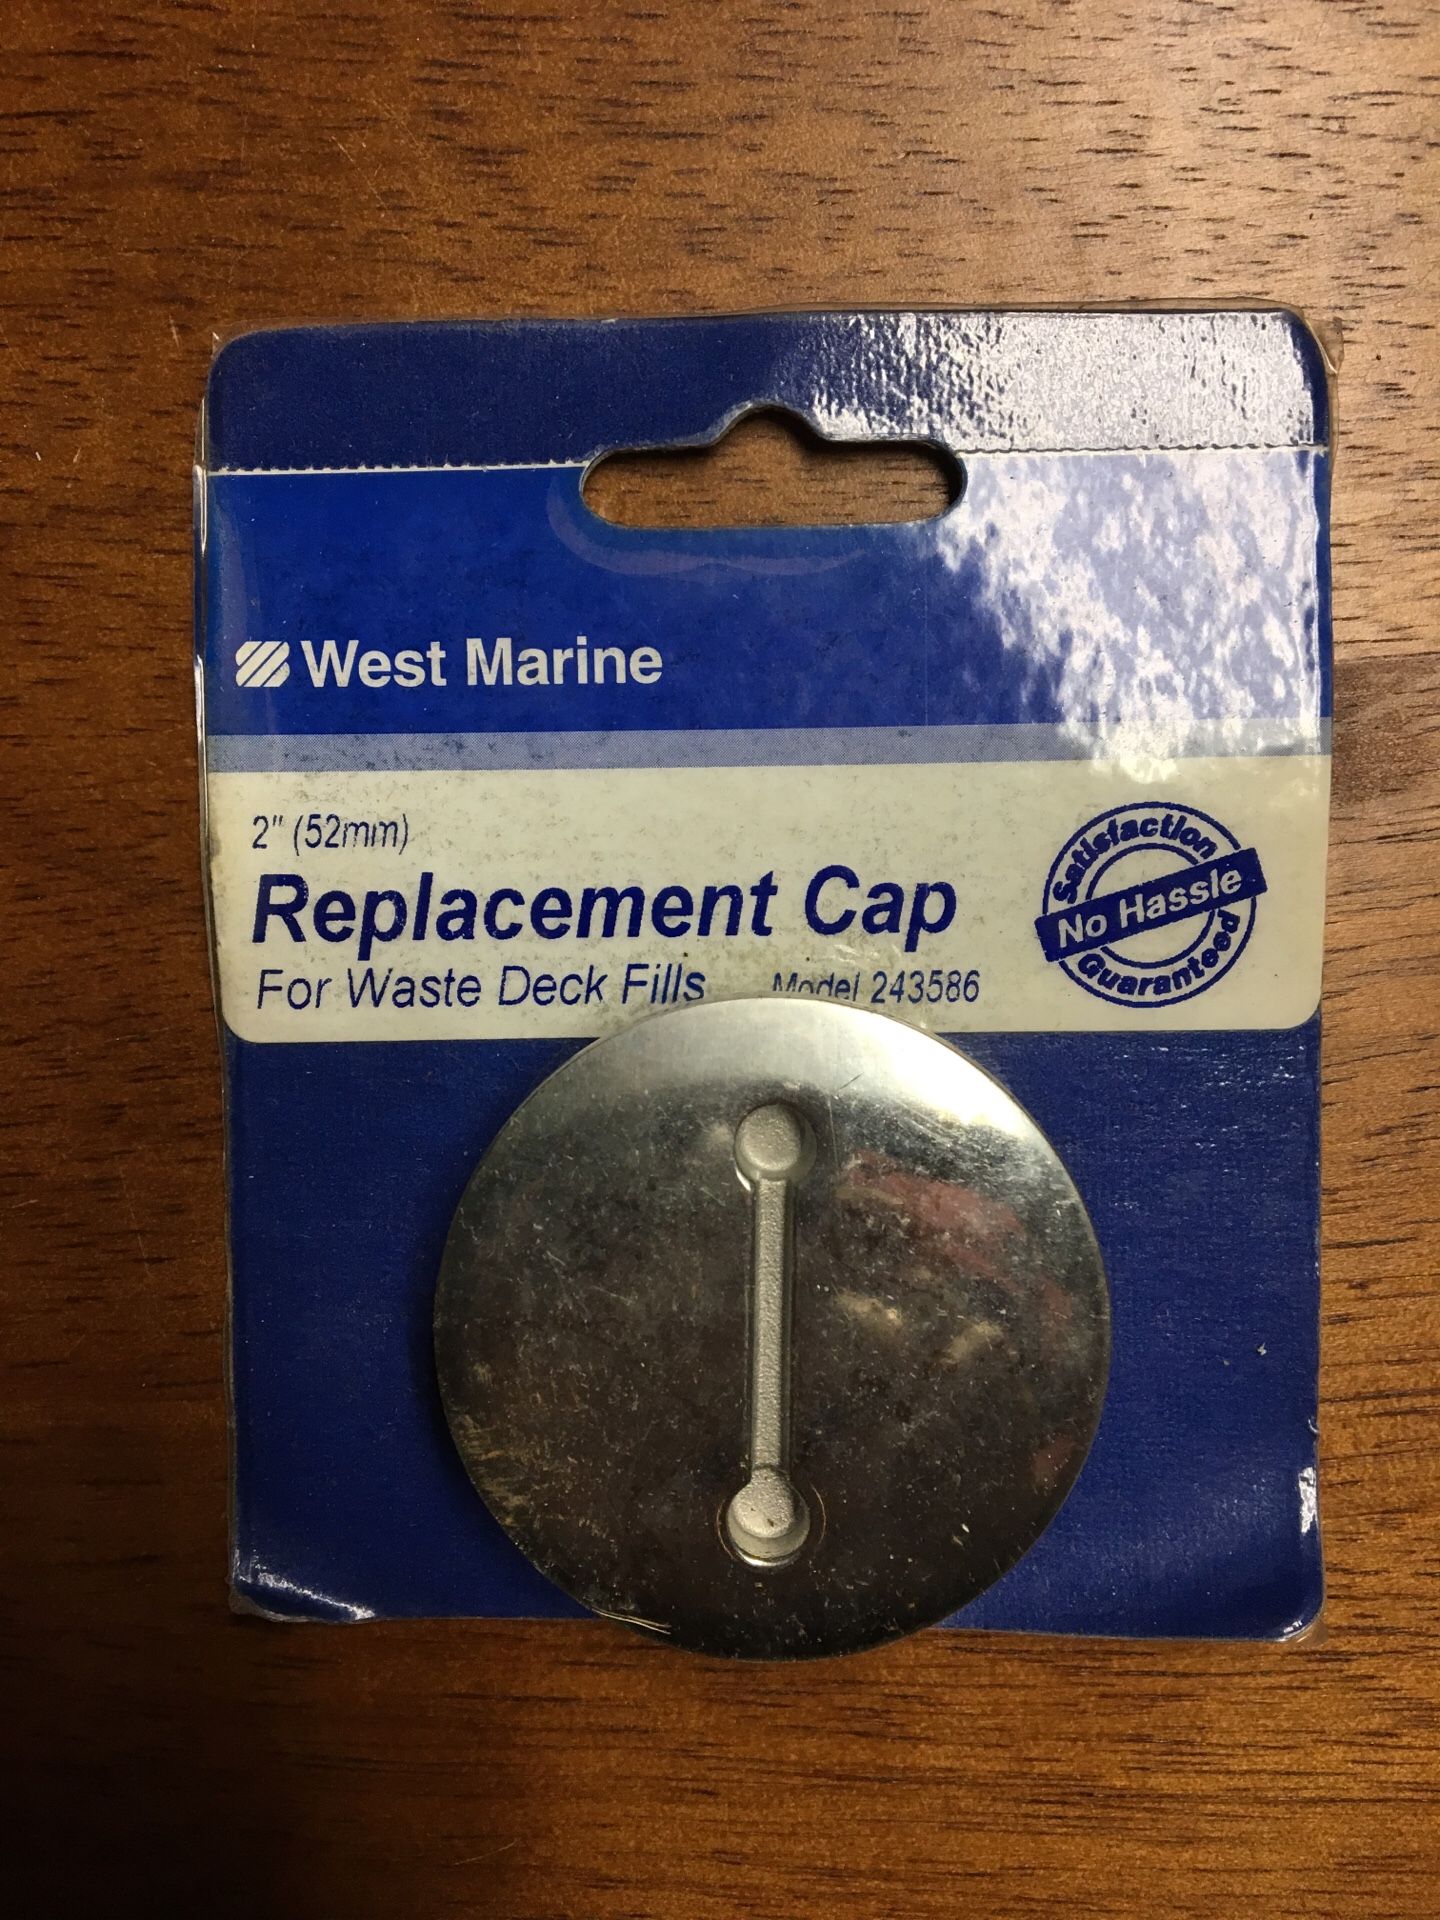 West Marine Deck Fill Replacement Cap